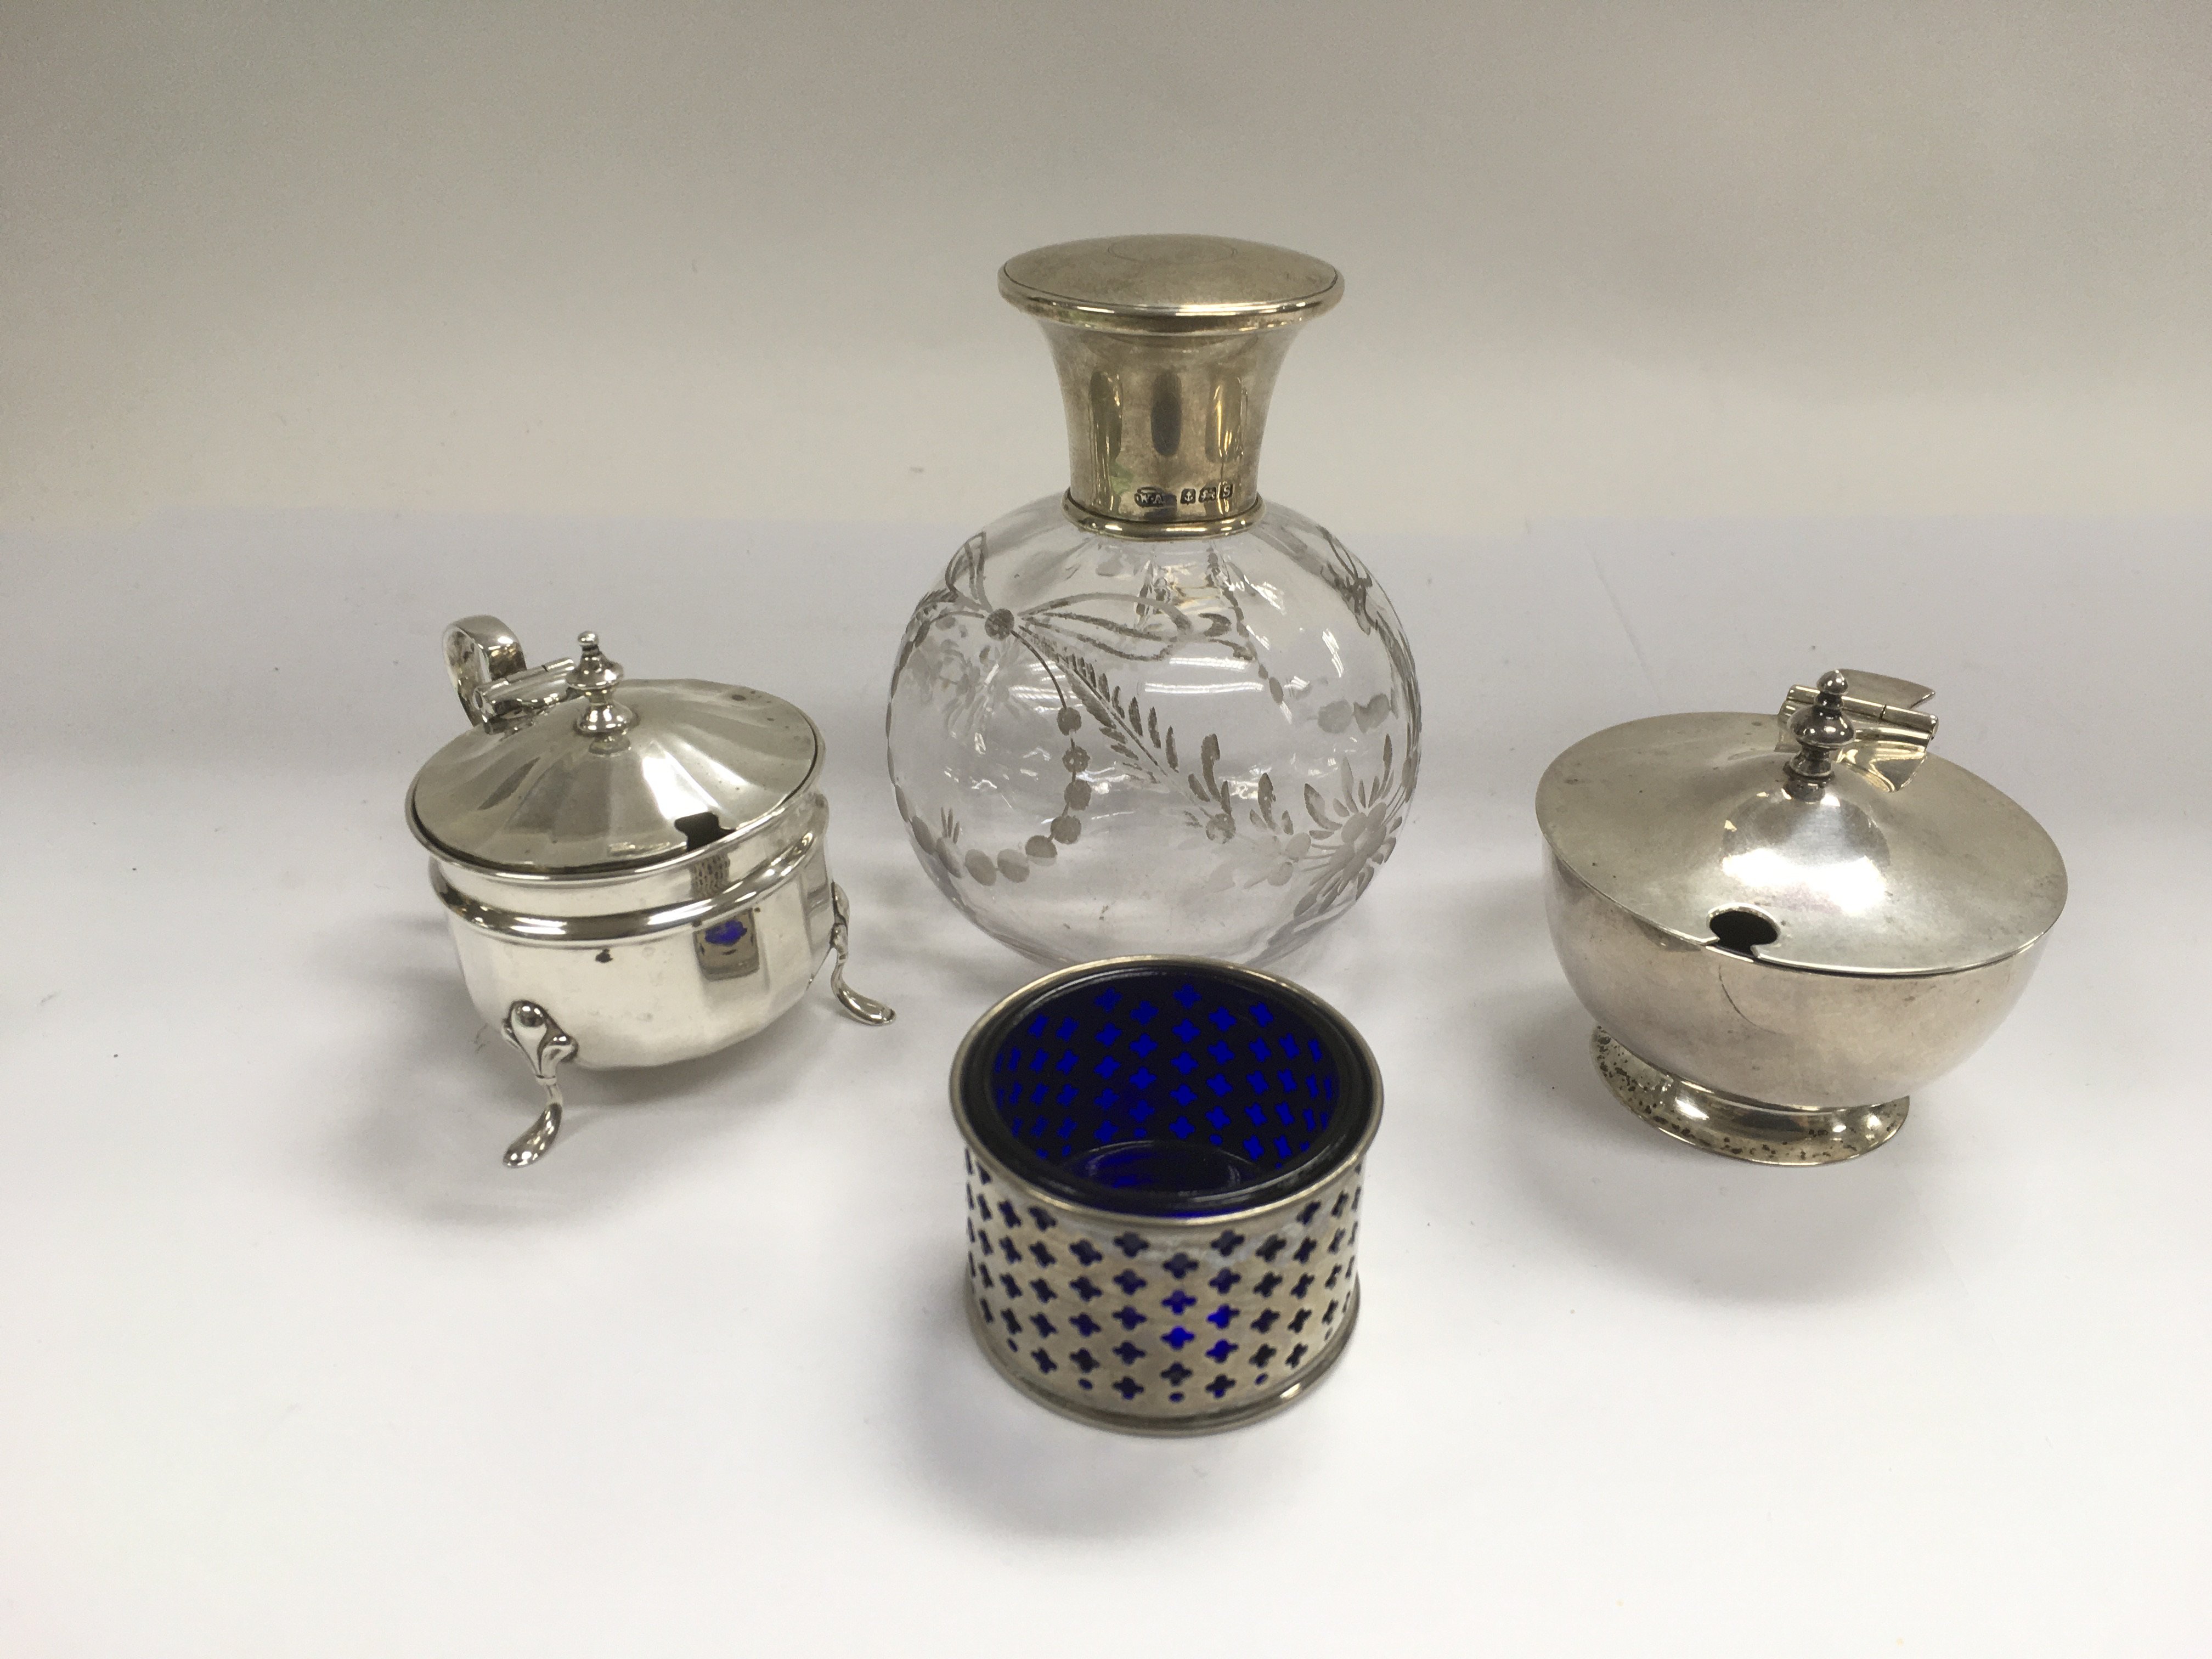 A silver topped perfume bottle and three silver co